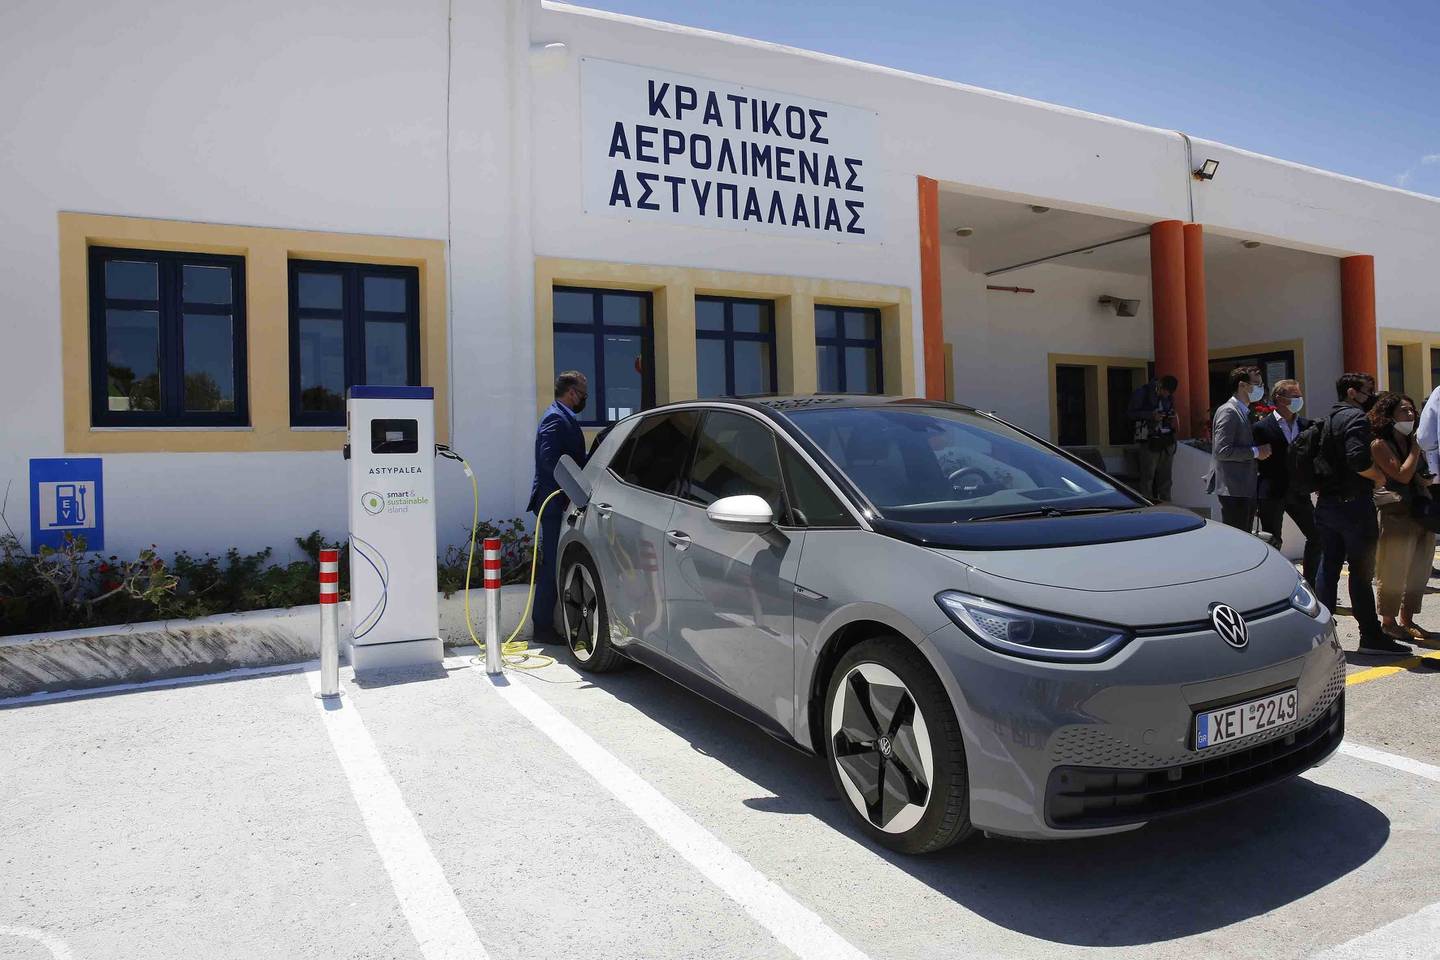 A Volkswagen ID. 4 electric car is charged at the airport of the Aegean Sea island of Astypalea, Greece. AP